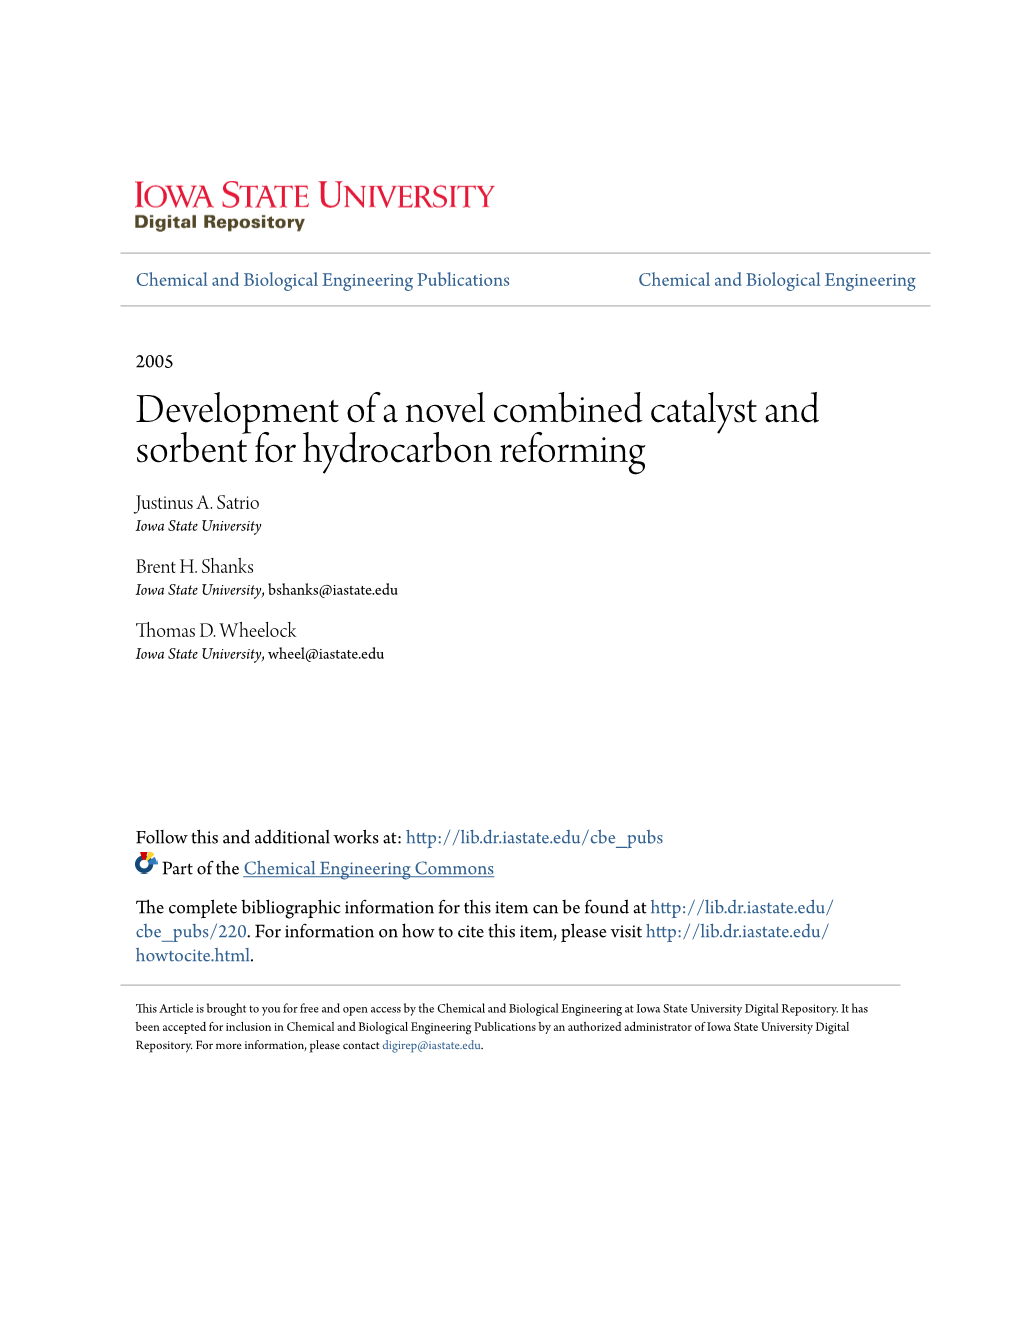 Development of a Novel Combined Catalyst and Sorbent for Hydrocarbon Reforming Justinus A